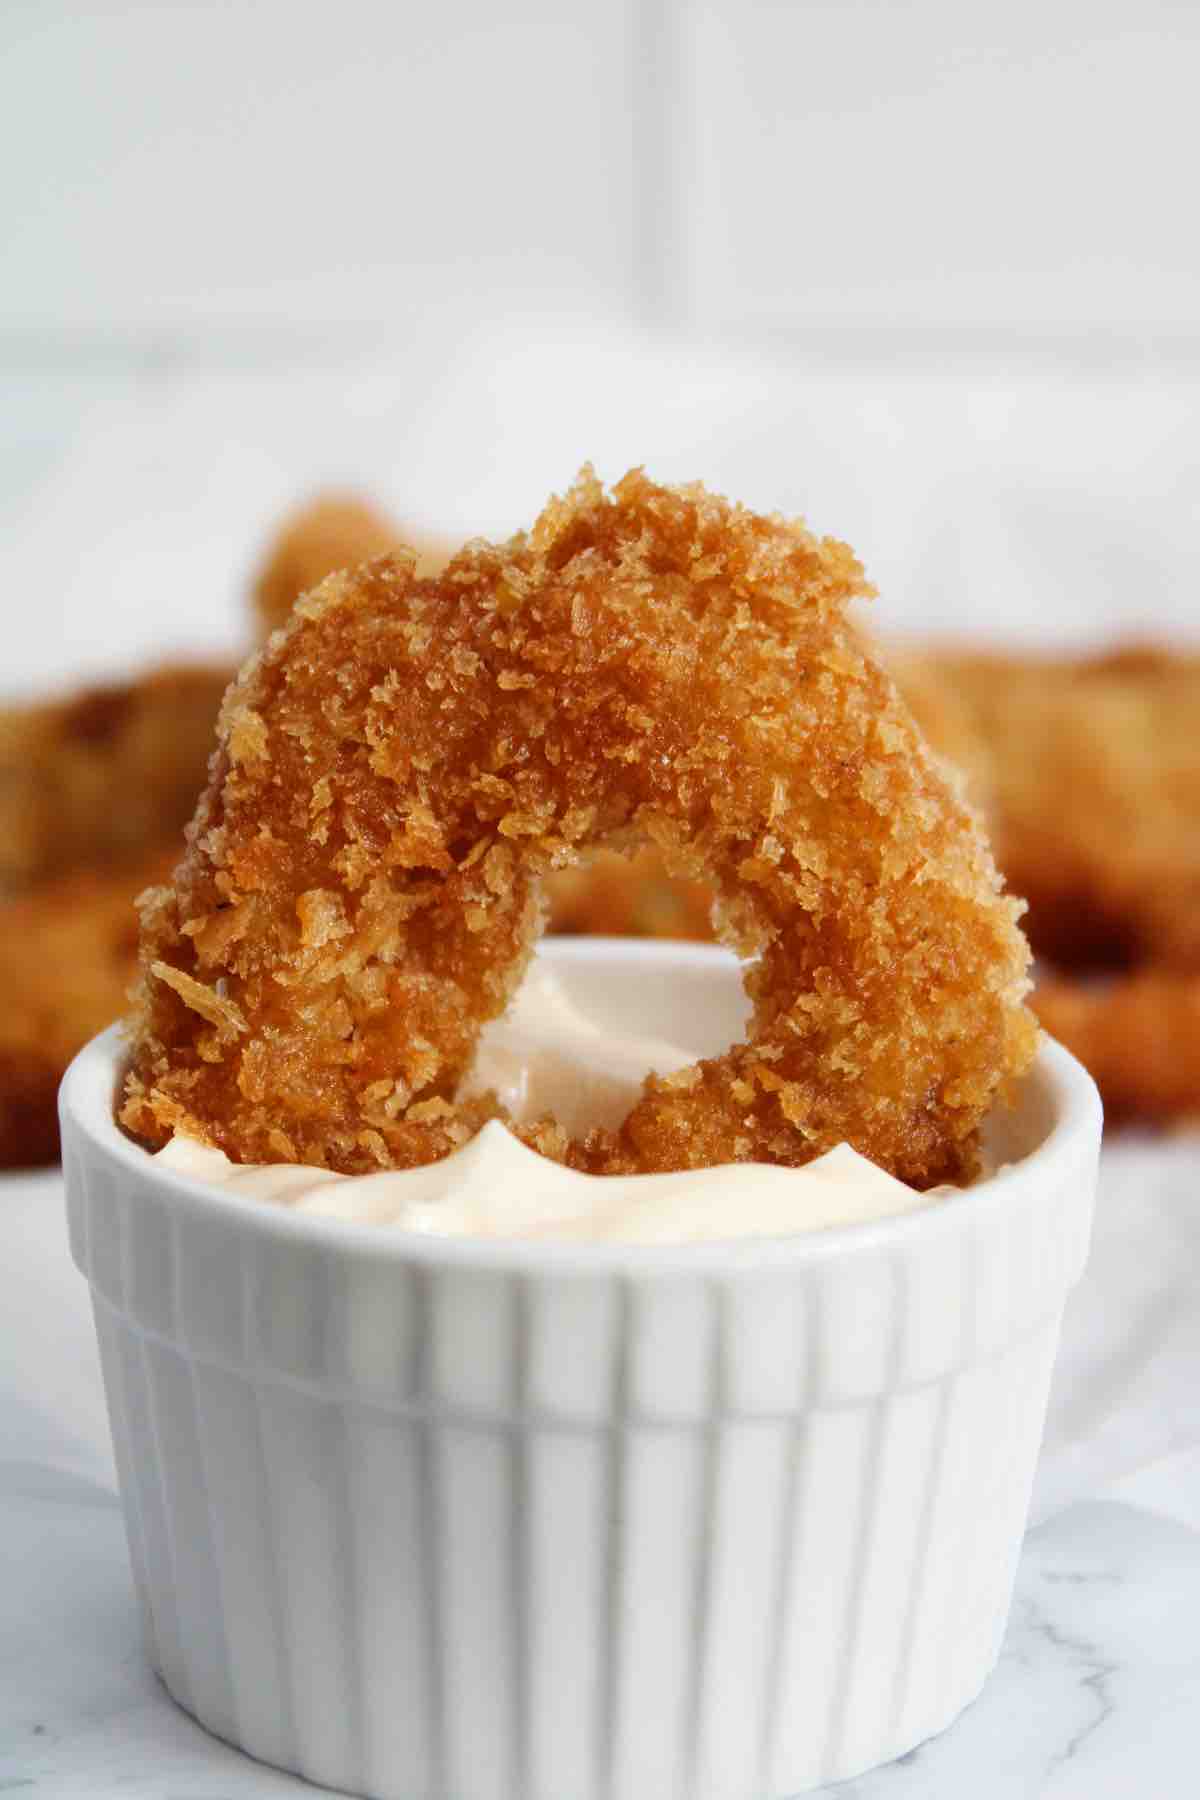 These seasoned onion rings are crispy and delicious.